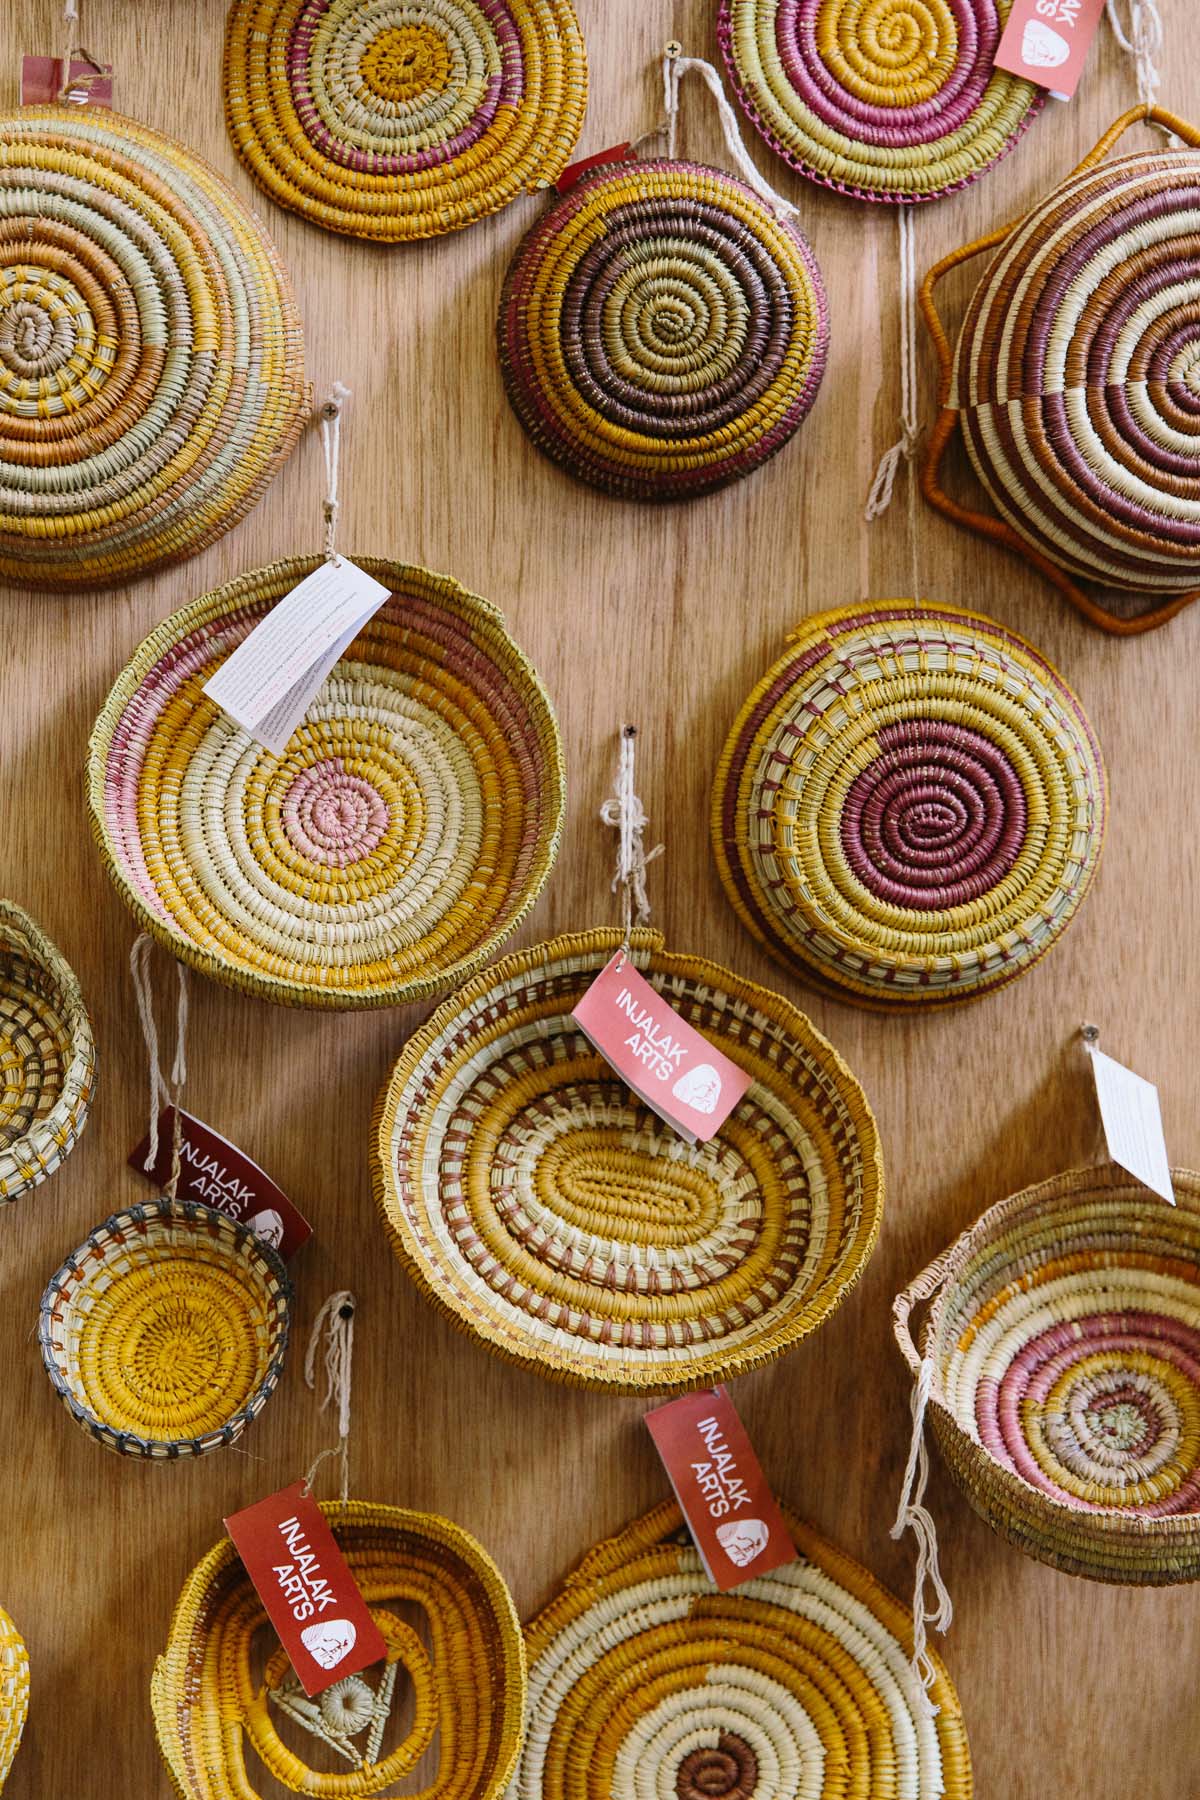 Handwoven baskets hung together on wooden wall at market